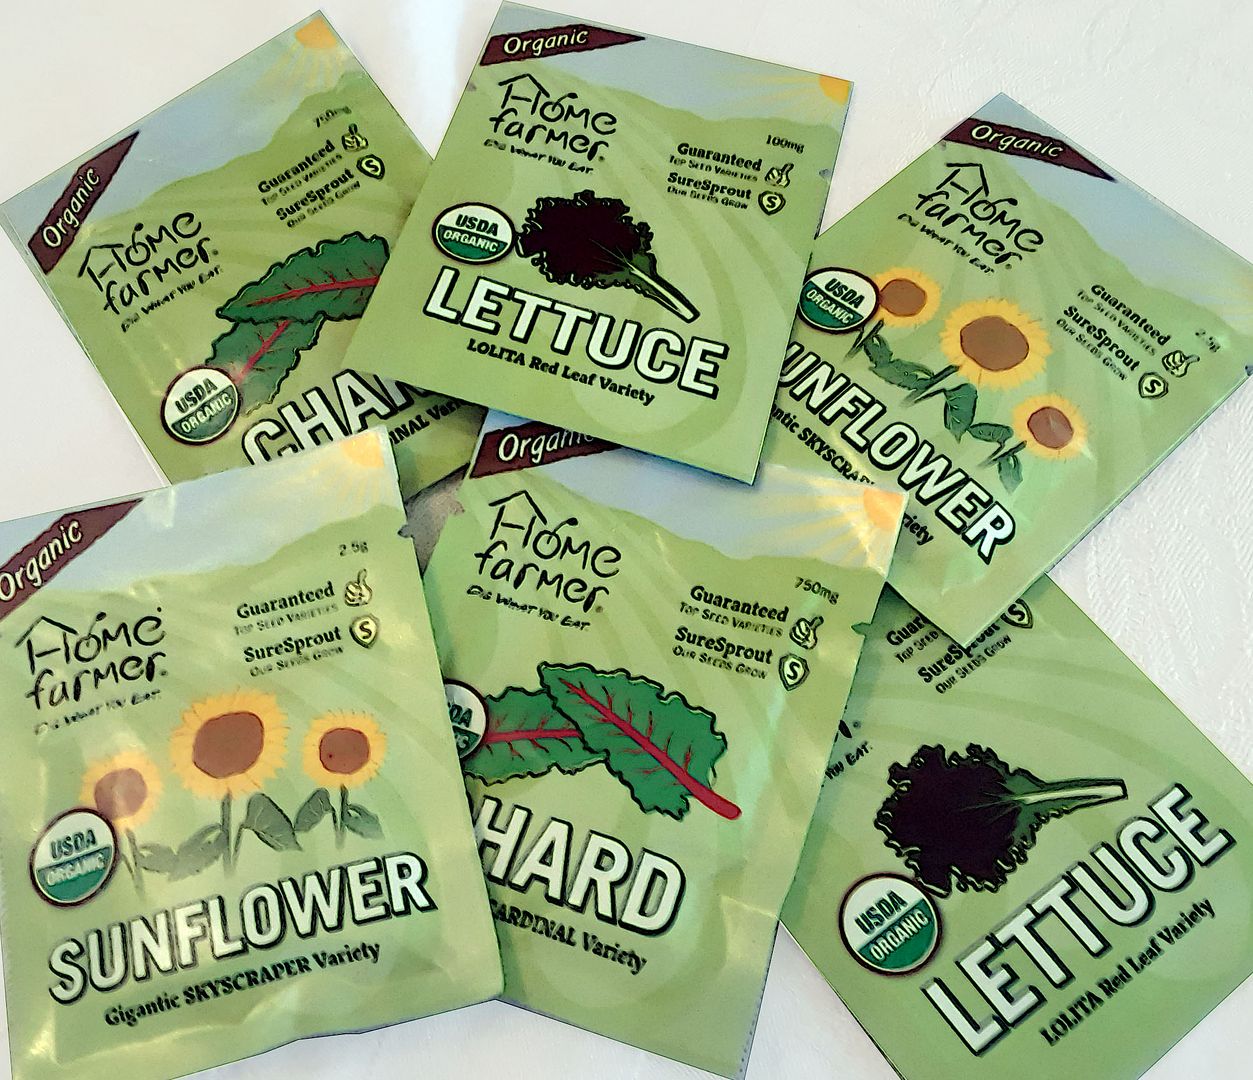 Earth Day 2019 seed packs